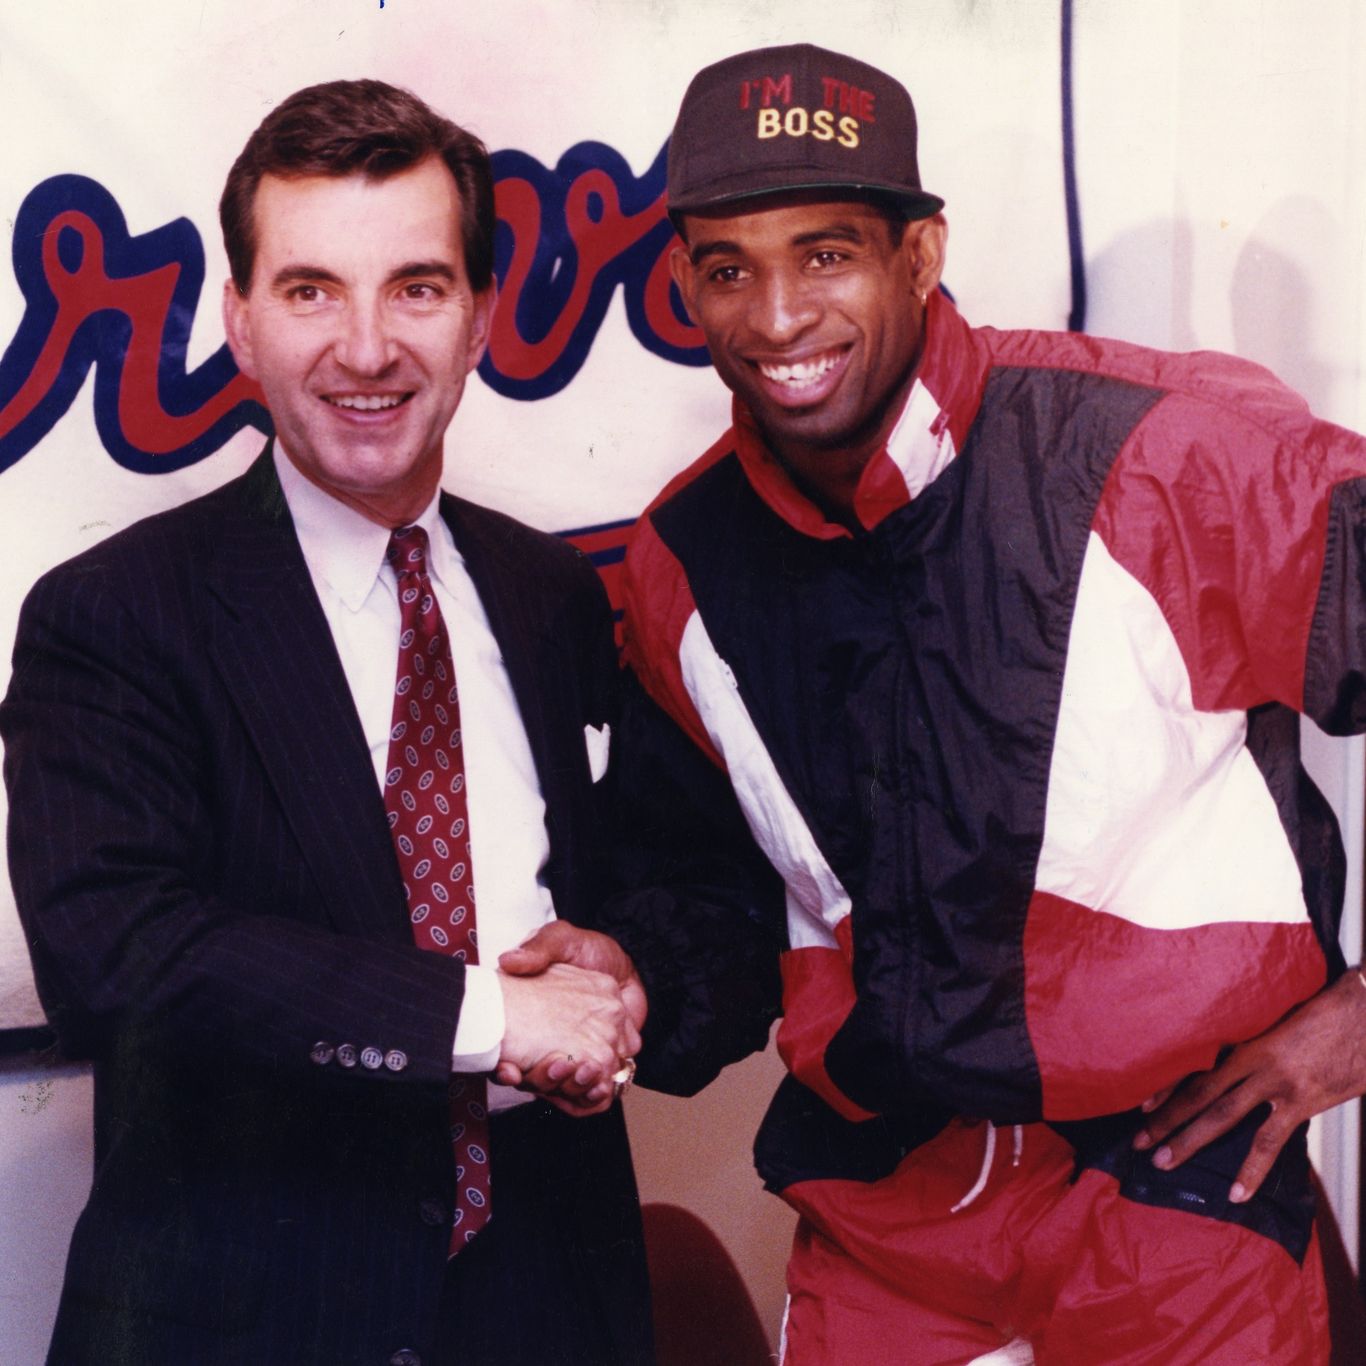 NFL executives are already talking about Deion Sanders coaching in